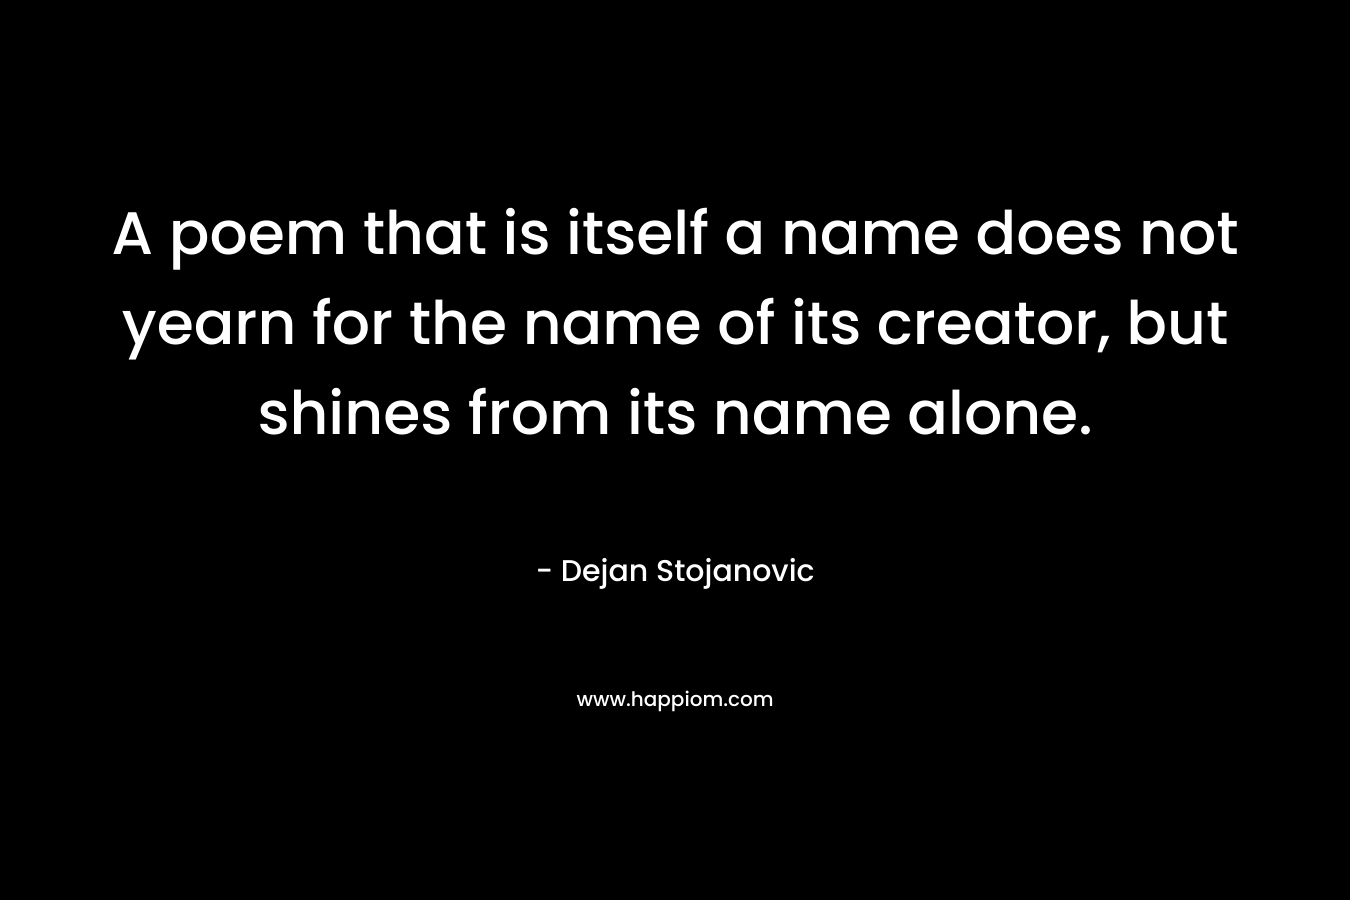 A poem that is itself a name does not yearn for the name of its creator, but shines from its name alone. – Dejan Stojanovic